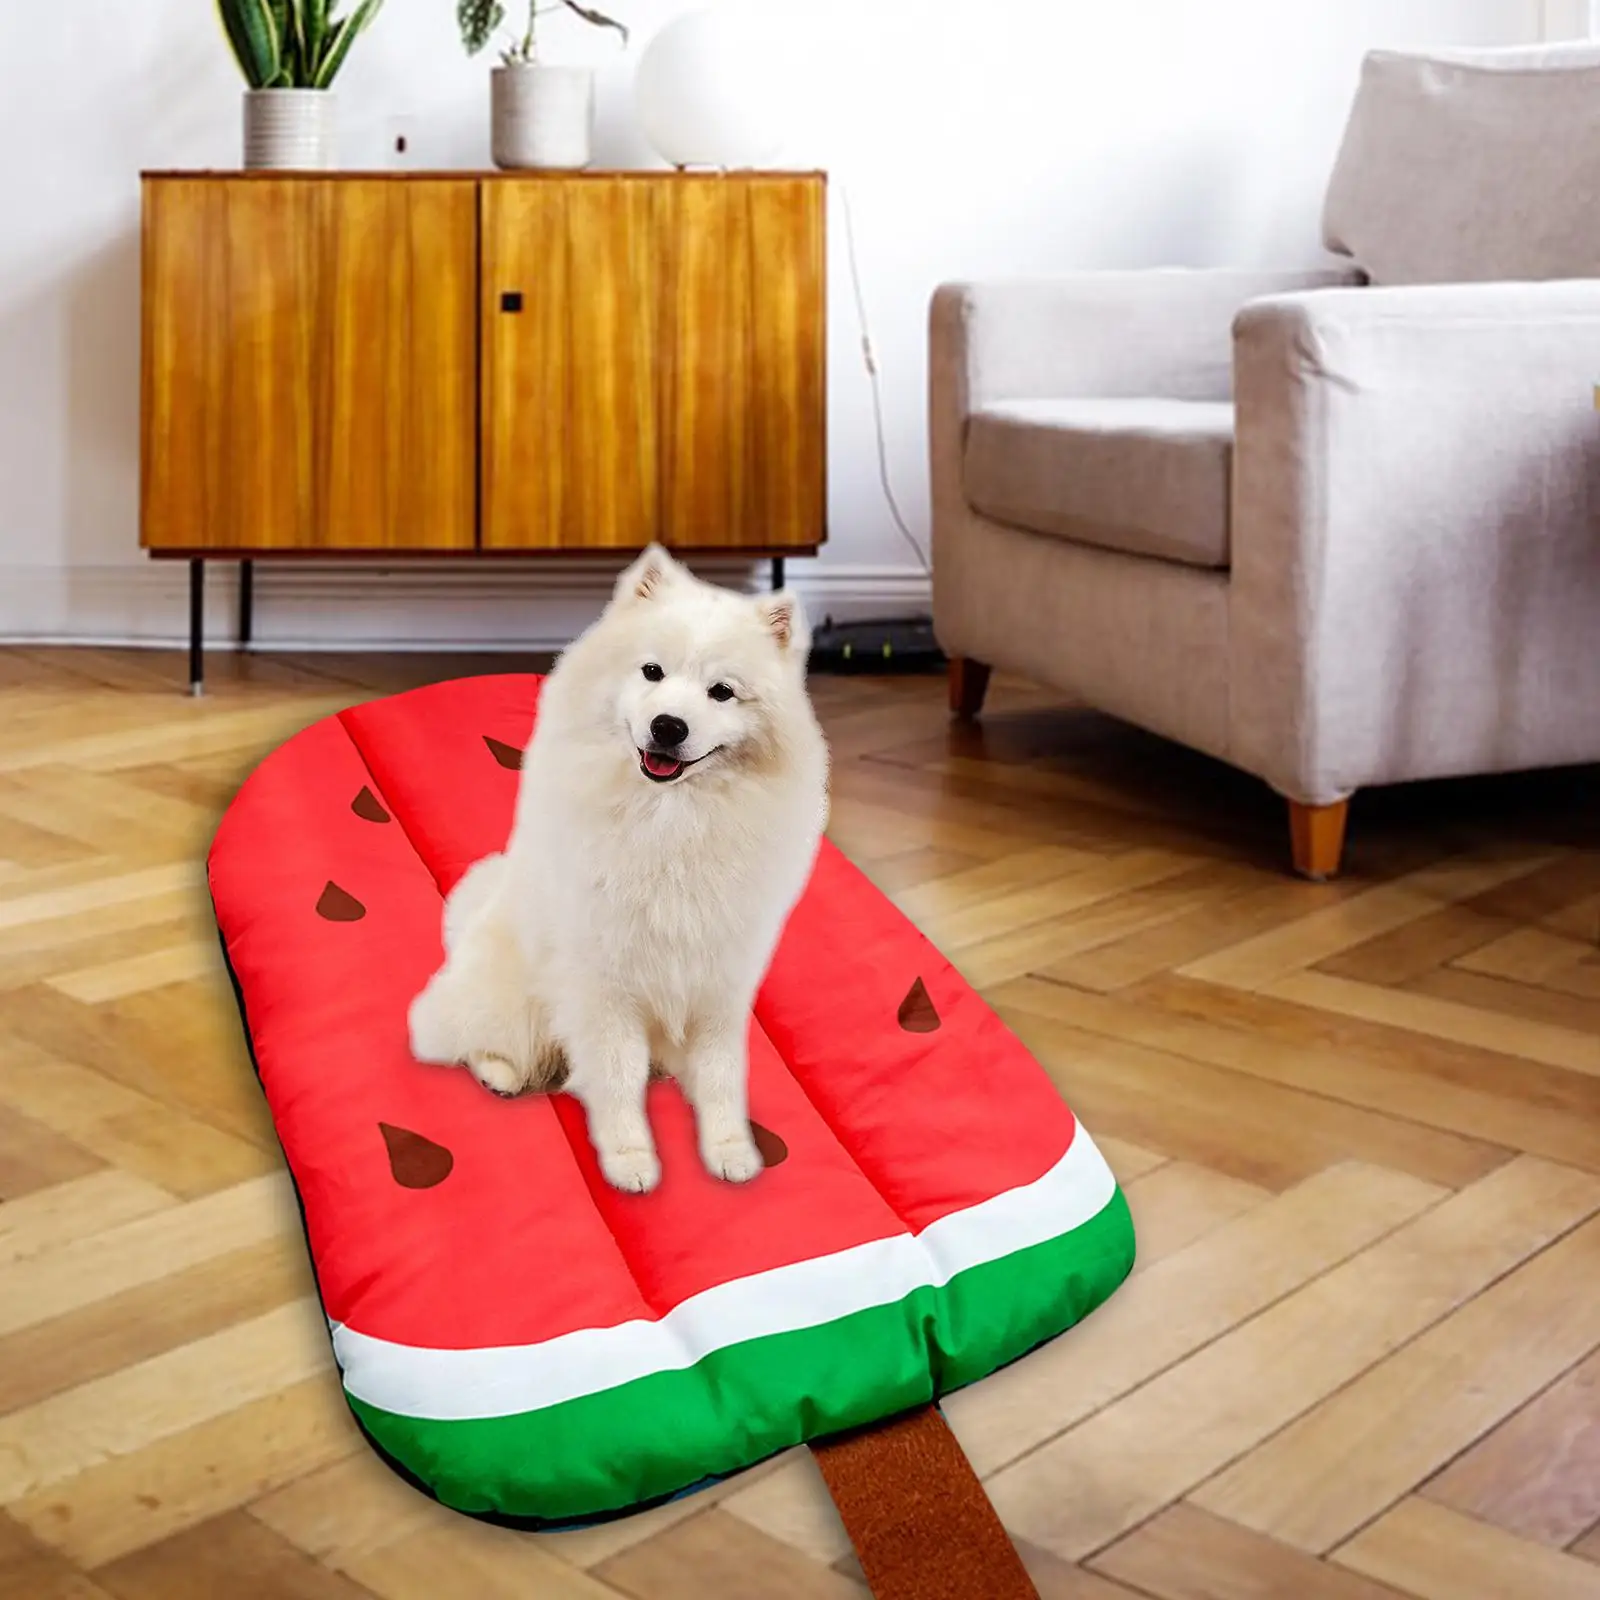 Pet Blanket Cat Bed Mat Dog Sleeping Pad Winter Crate Pad Cushion Bedding Kennel Comfortable Mattress Nest for Puppy Home Decor